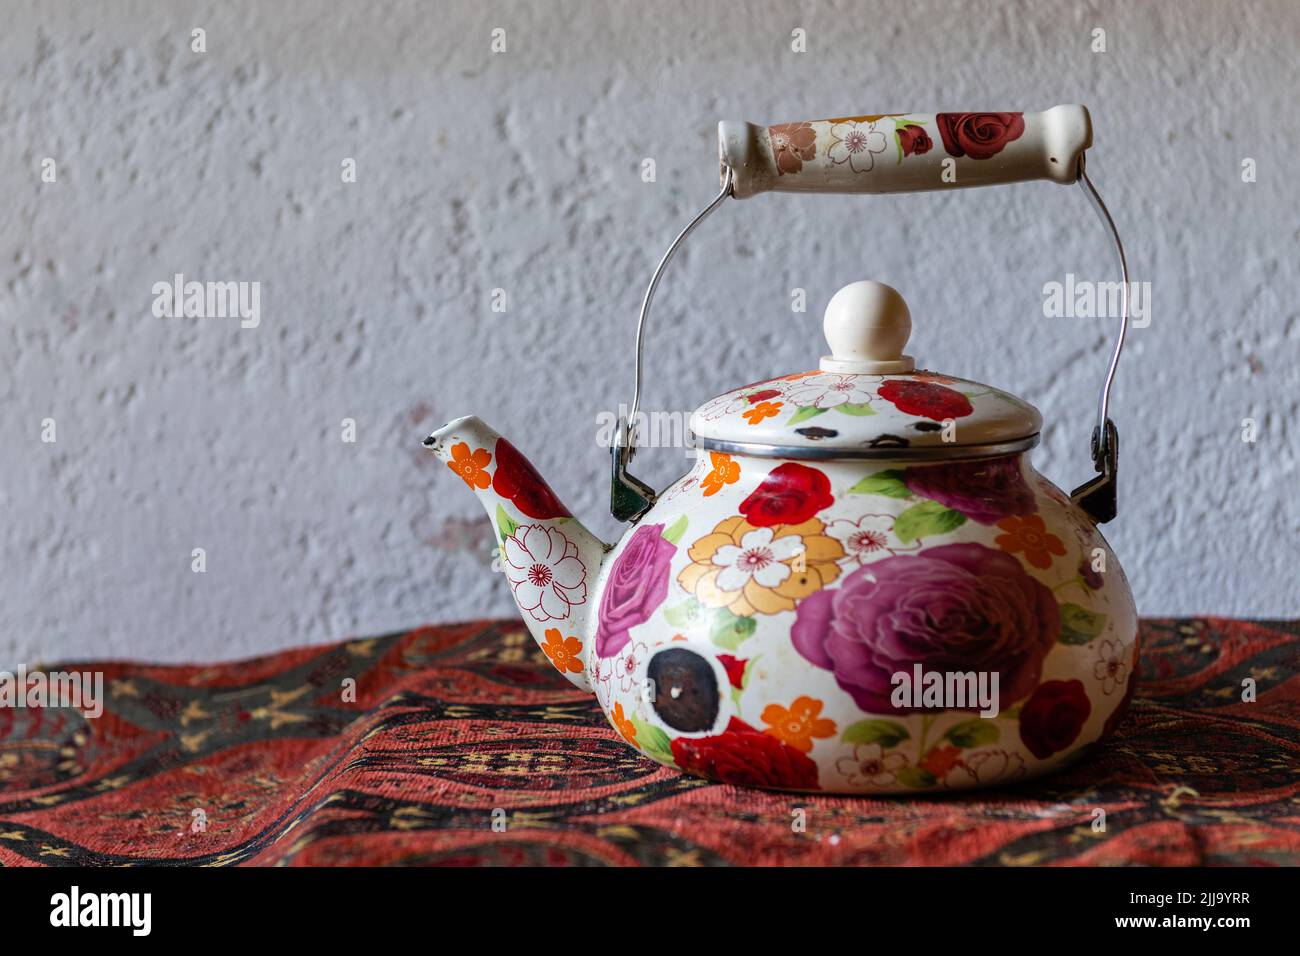 Old teapot decorated with hand-painted flowers, on an old table, with an embroidered mandel, on a white wall Stock Photo